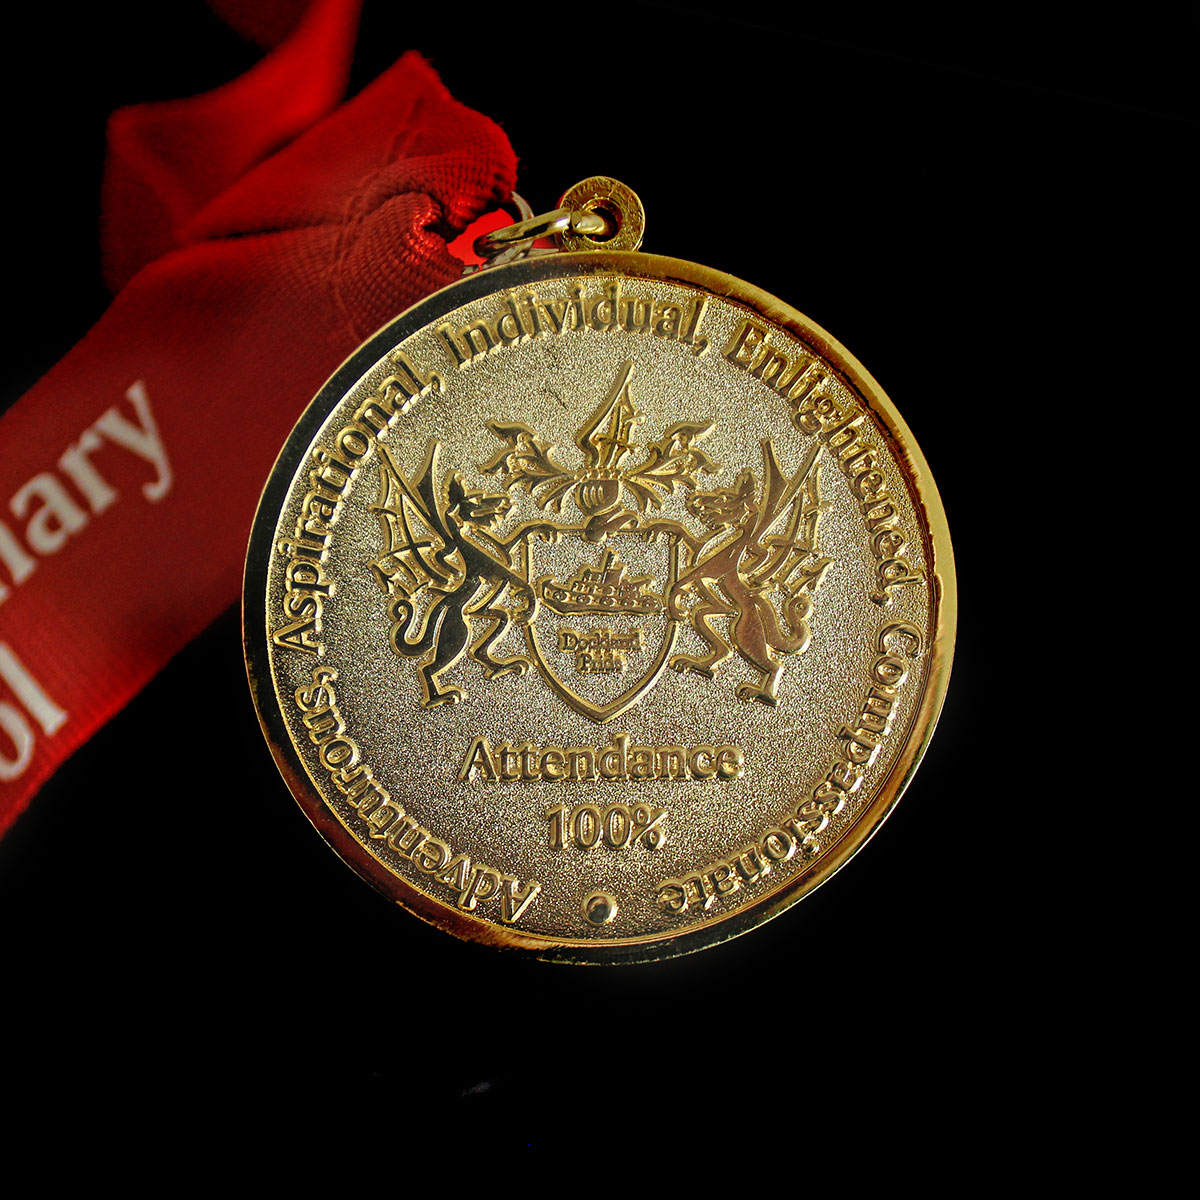 Close up image of 50mm Gold Frosted Polished Redriff Attendance Schools Medal